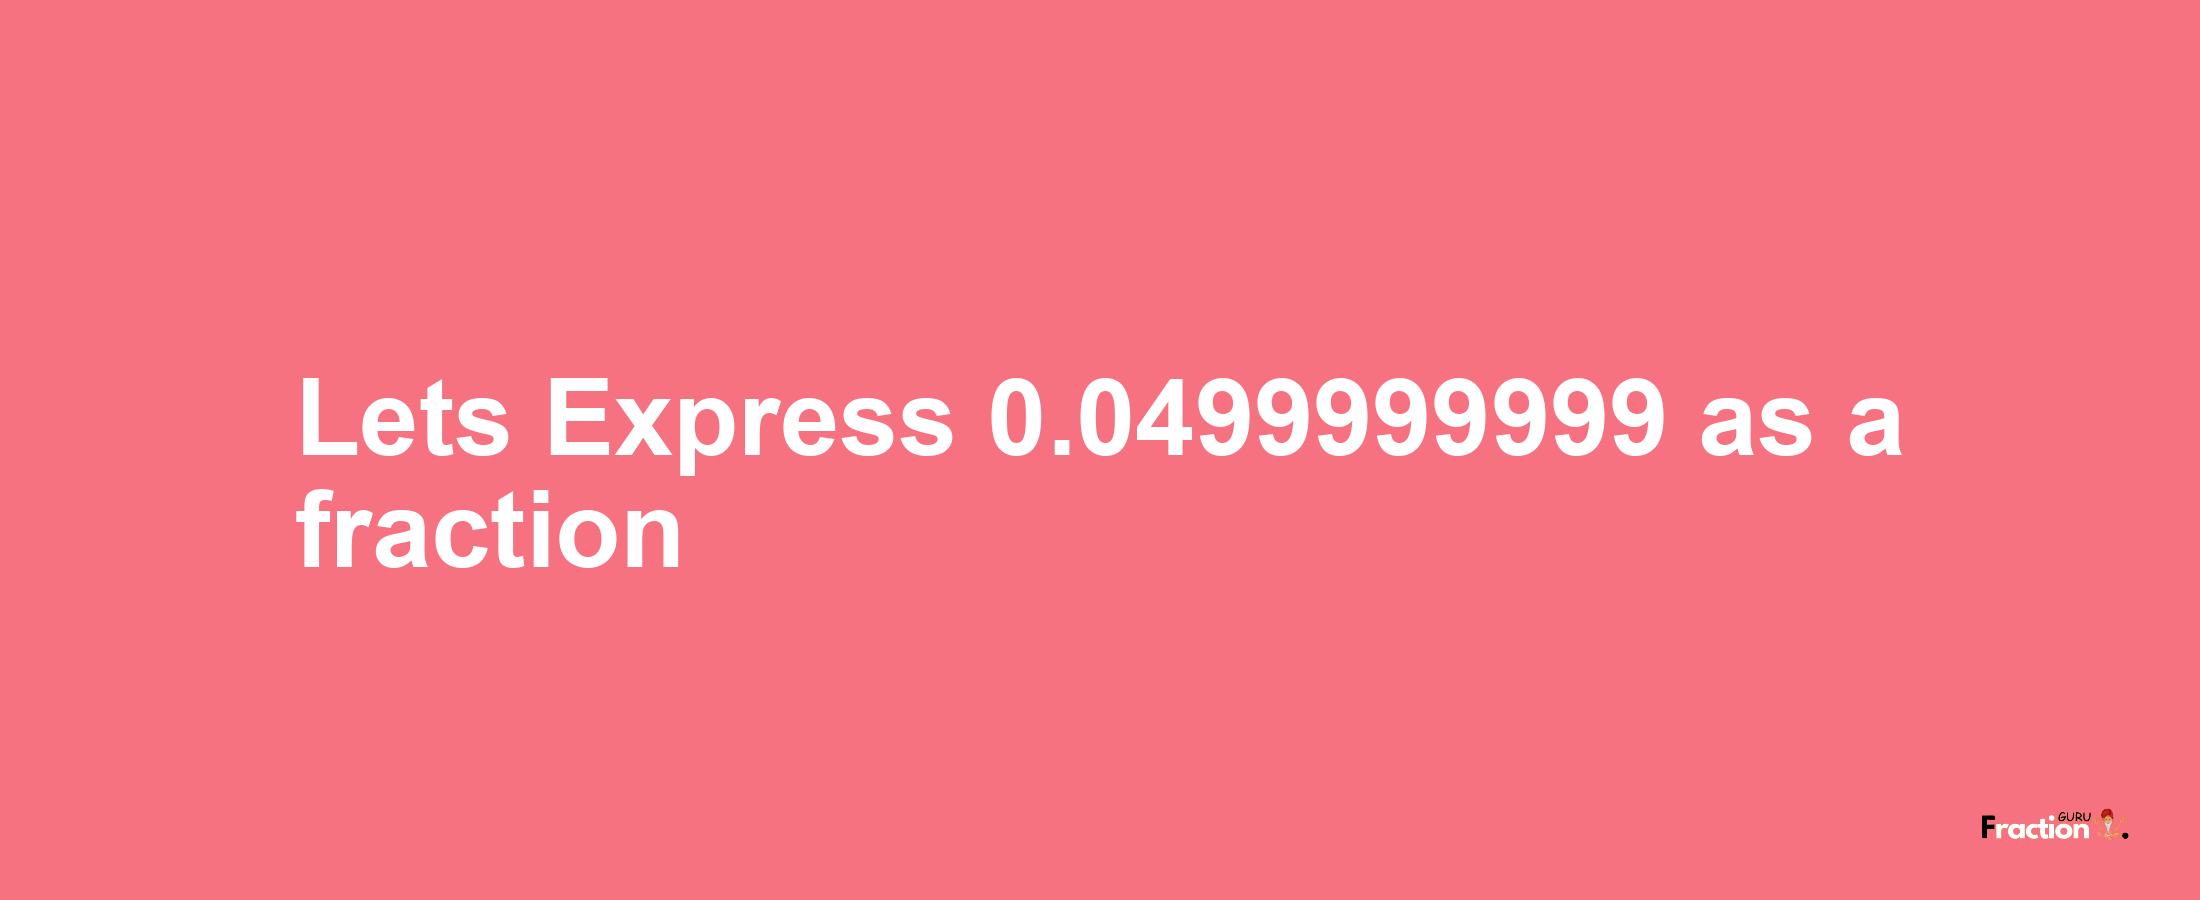 Lets Express 0.0499999999 as afraction